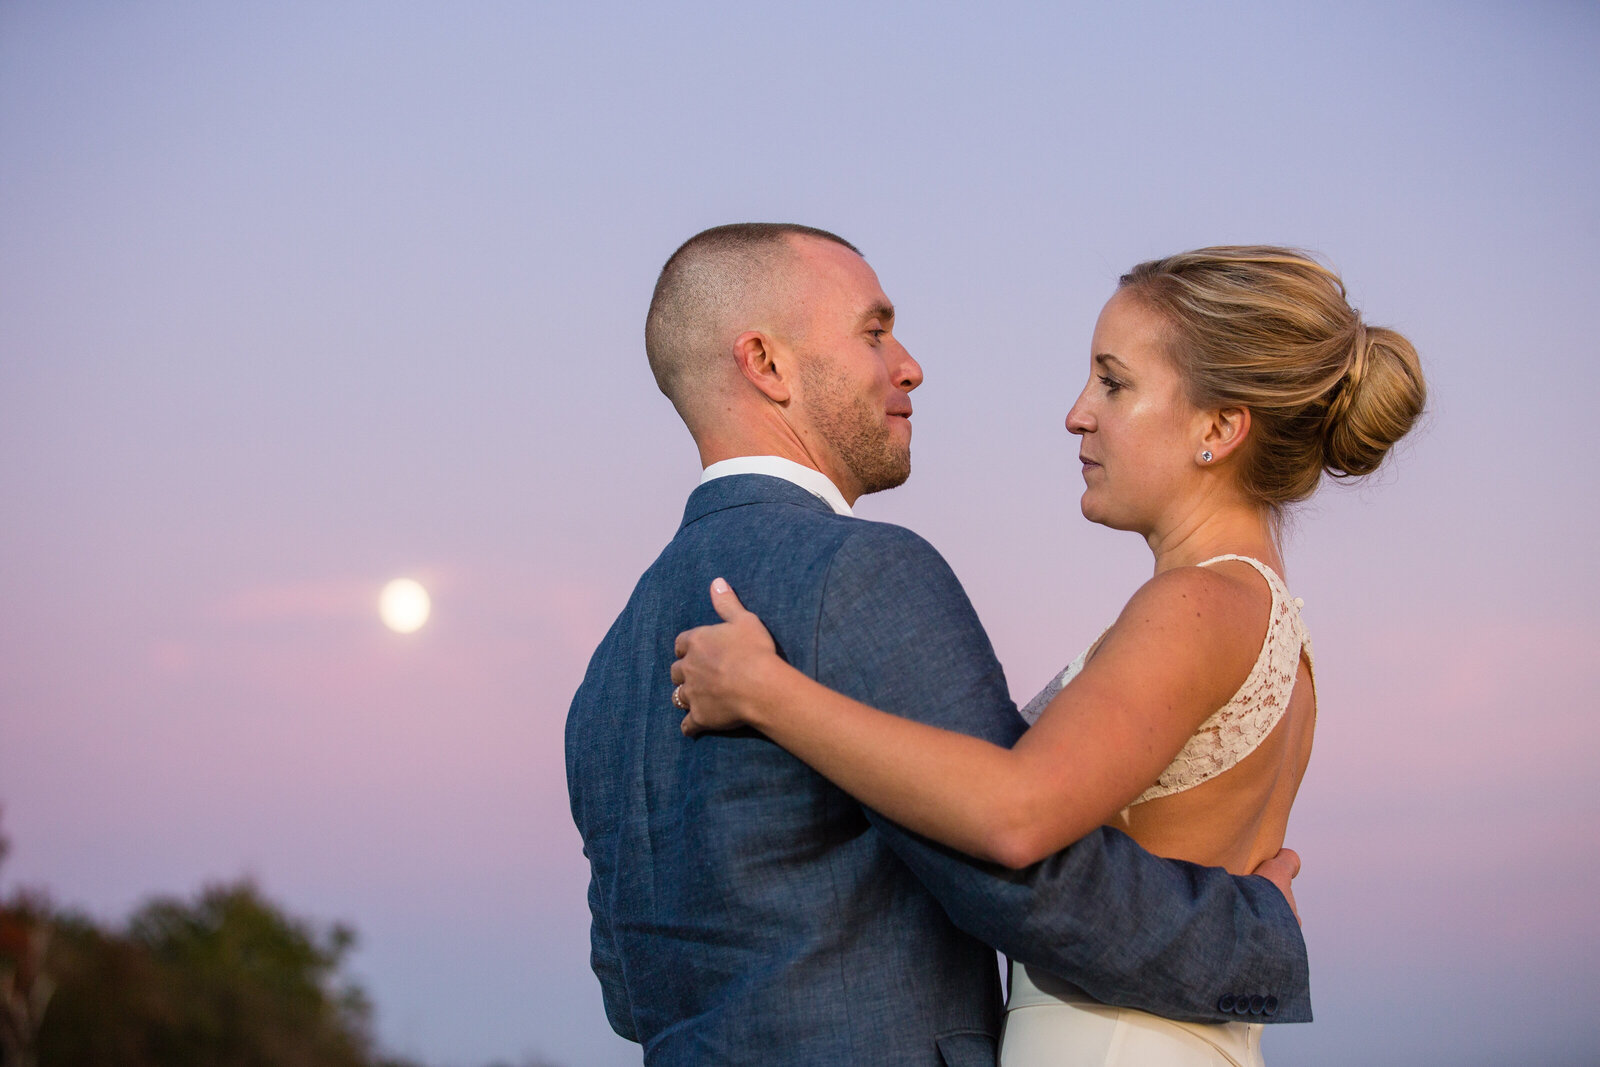 couple dances at twilight with moon